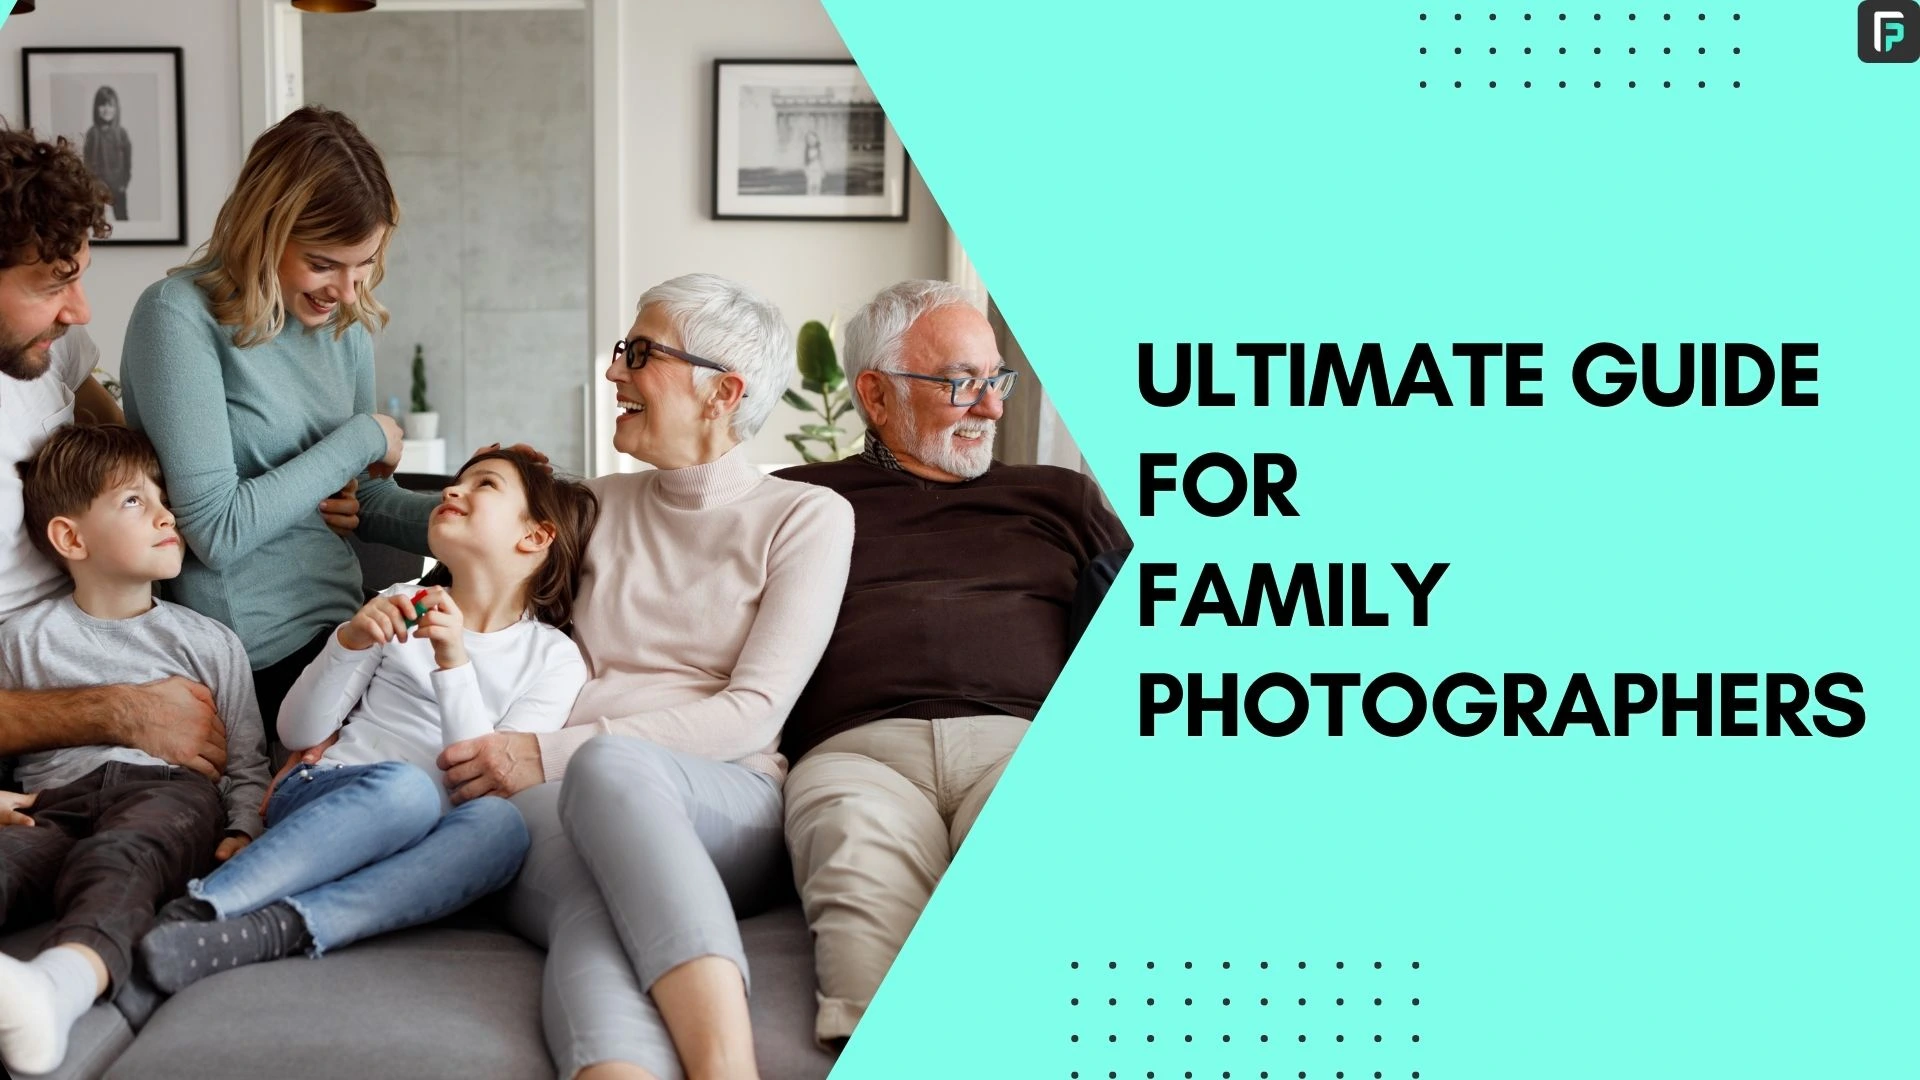 Ultimate Guide for Family Photographer Image Banner